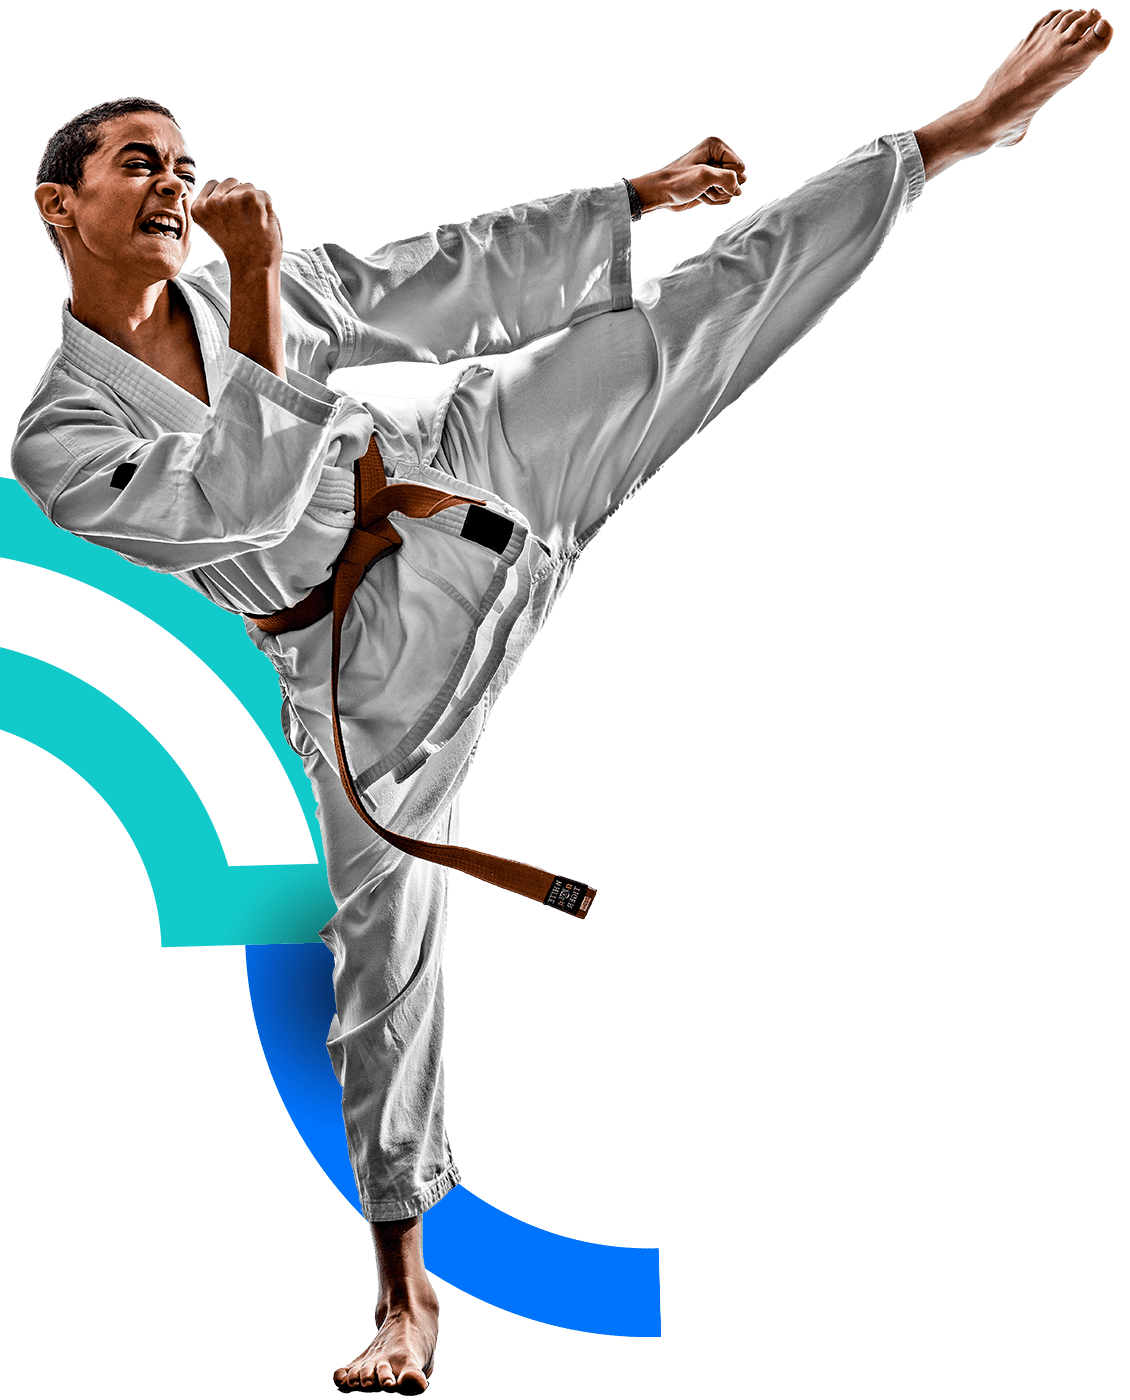 In the picture, there is a male karateka making a high kick.